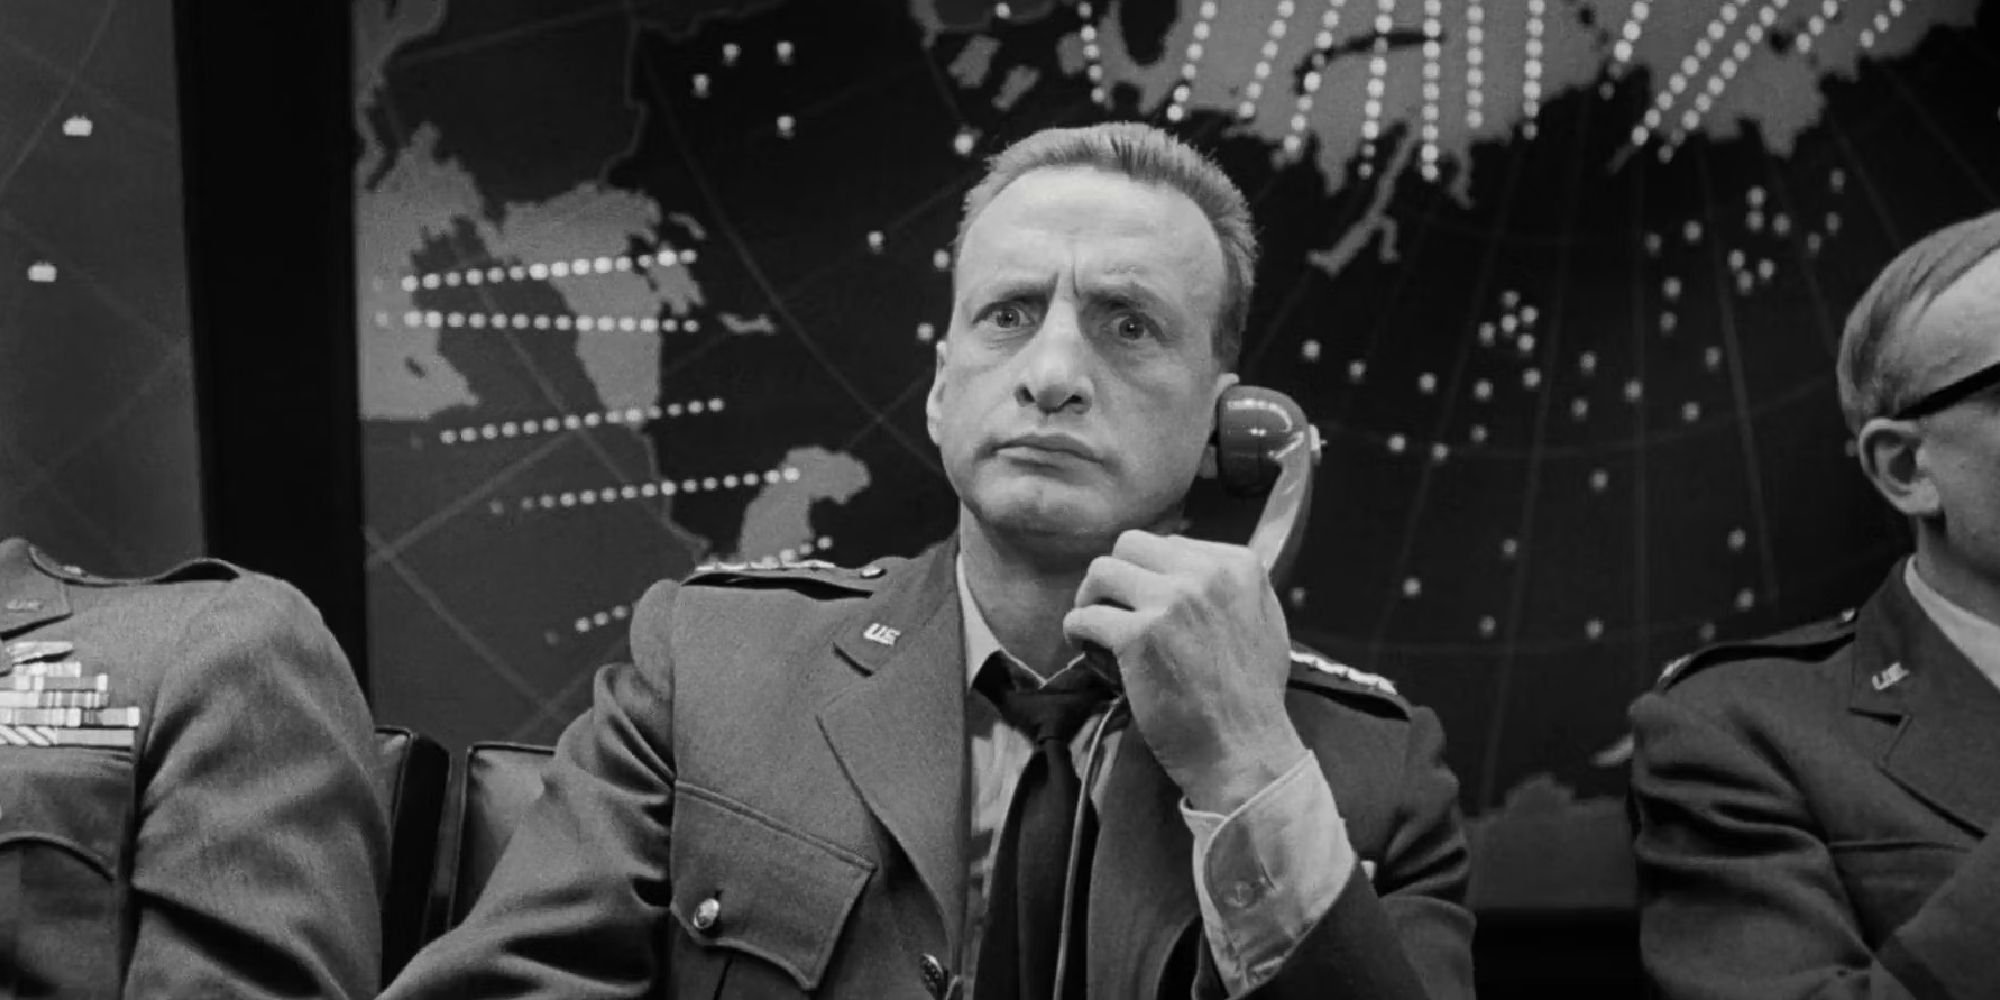 George C Scott as General "Buck" Turgidson on the phone concerningly in Dr Strangelove